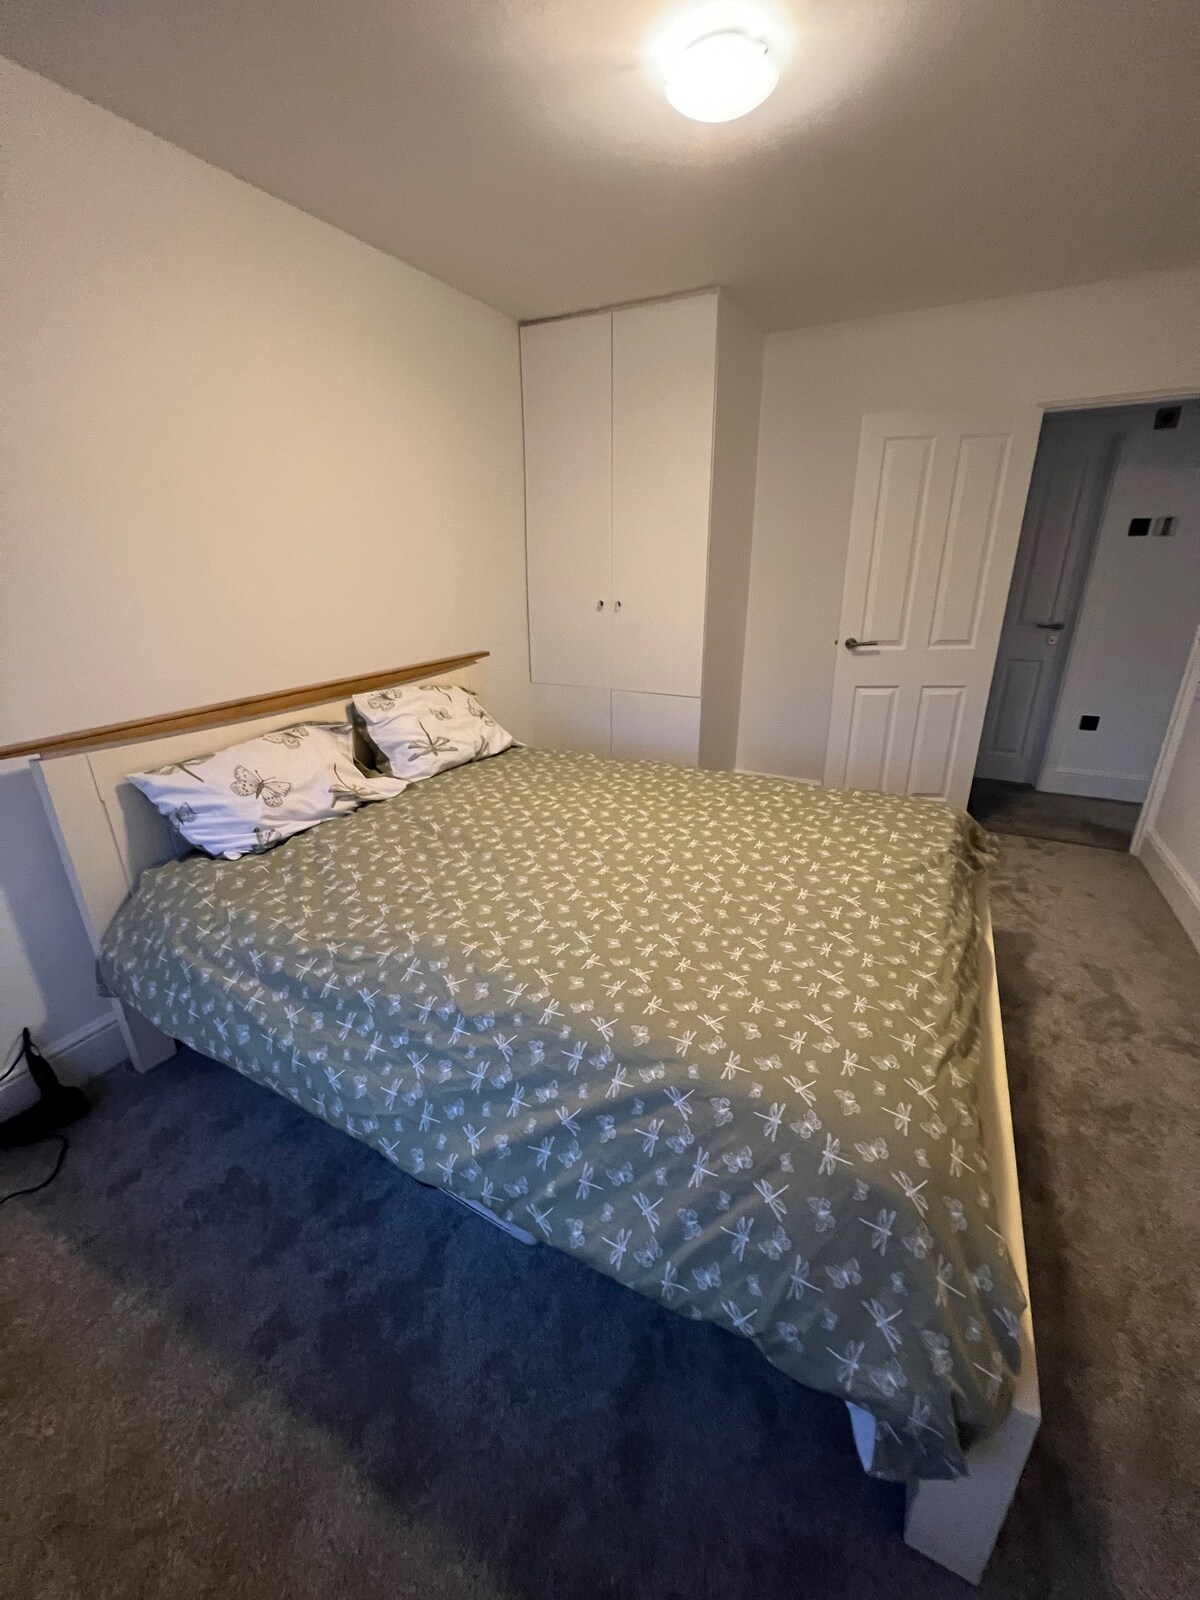 Spare room in 3 bedroom house